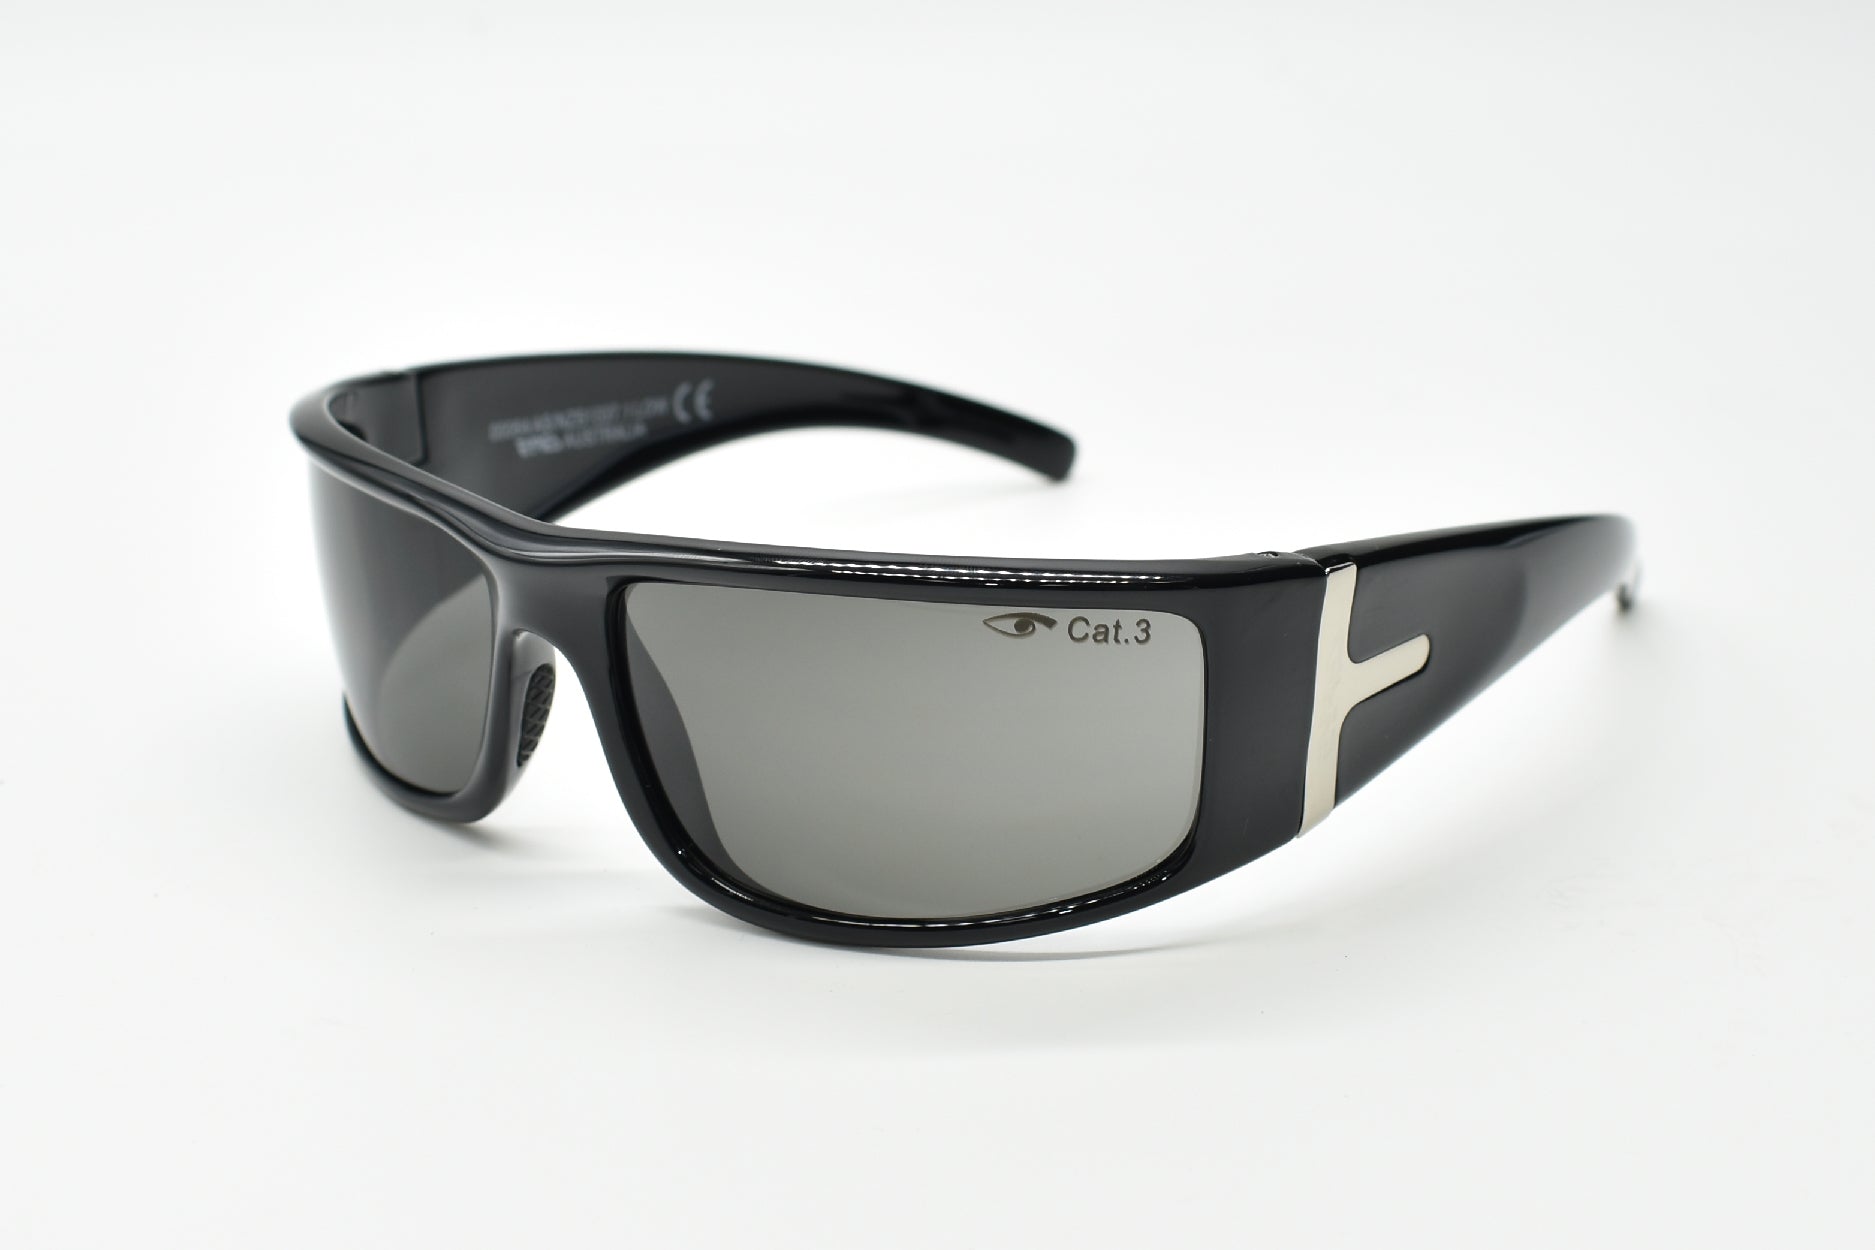 Allure Safety Glasses Gloss Black Grey Tint